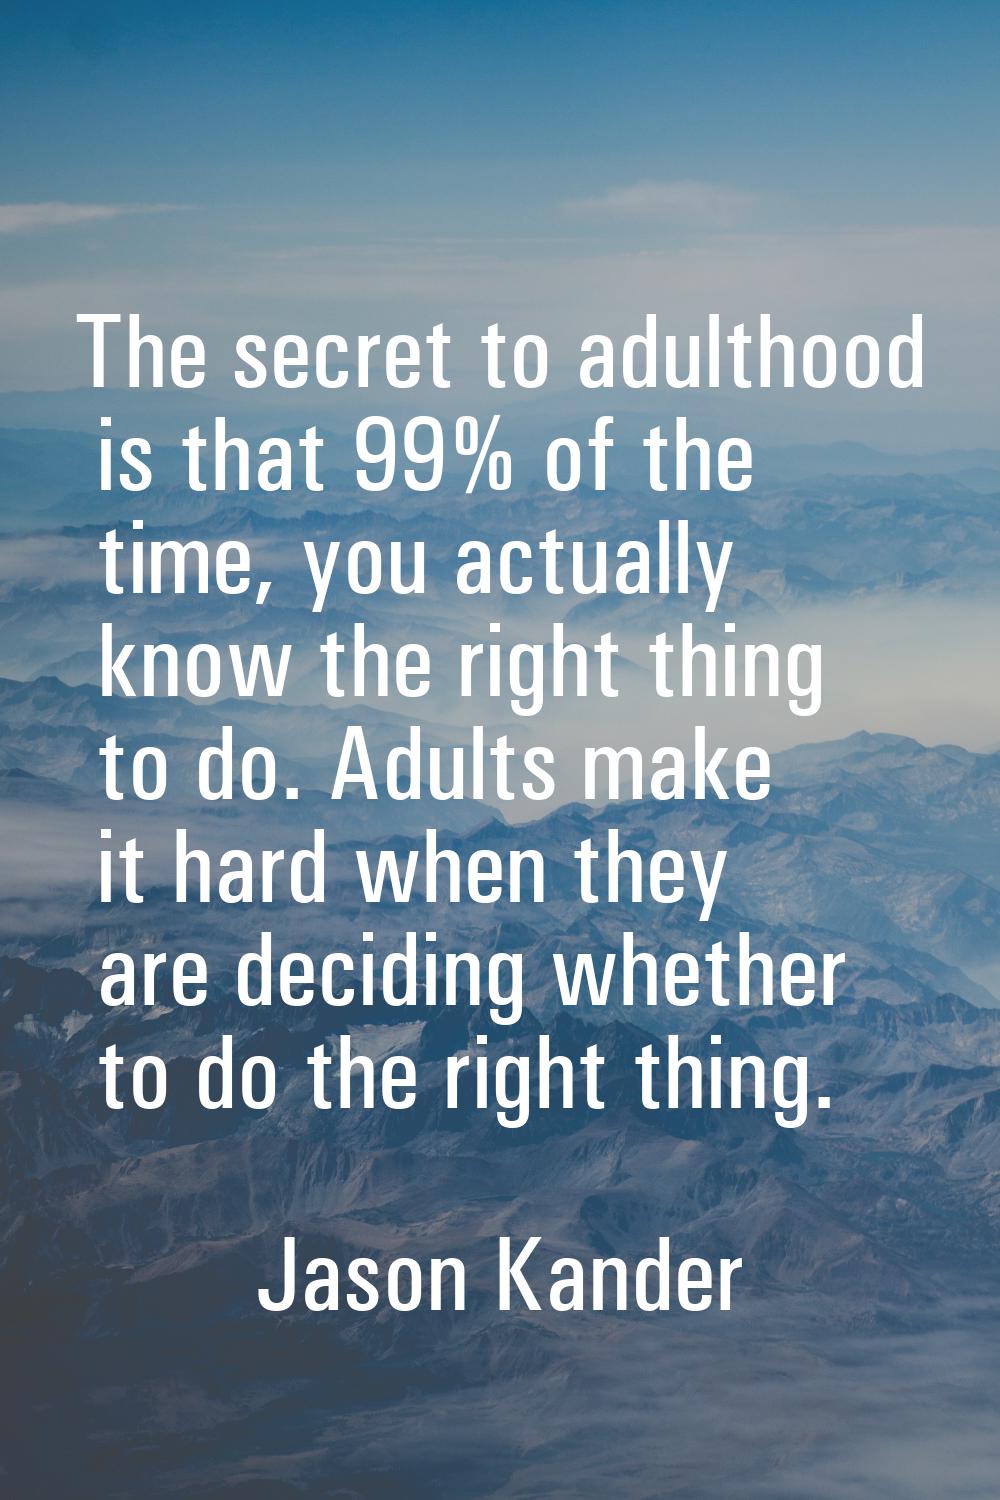 The secret to adulthood is that 99% of the time, you actually know the right thing to do. Adults ma